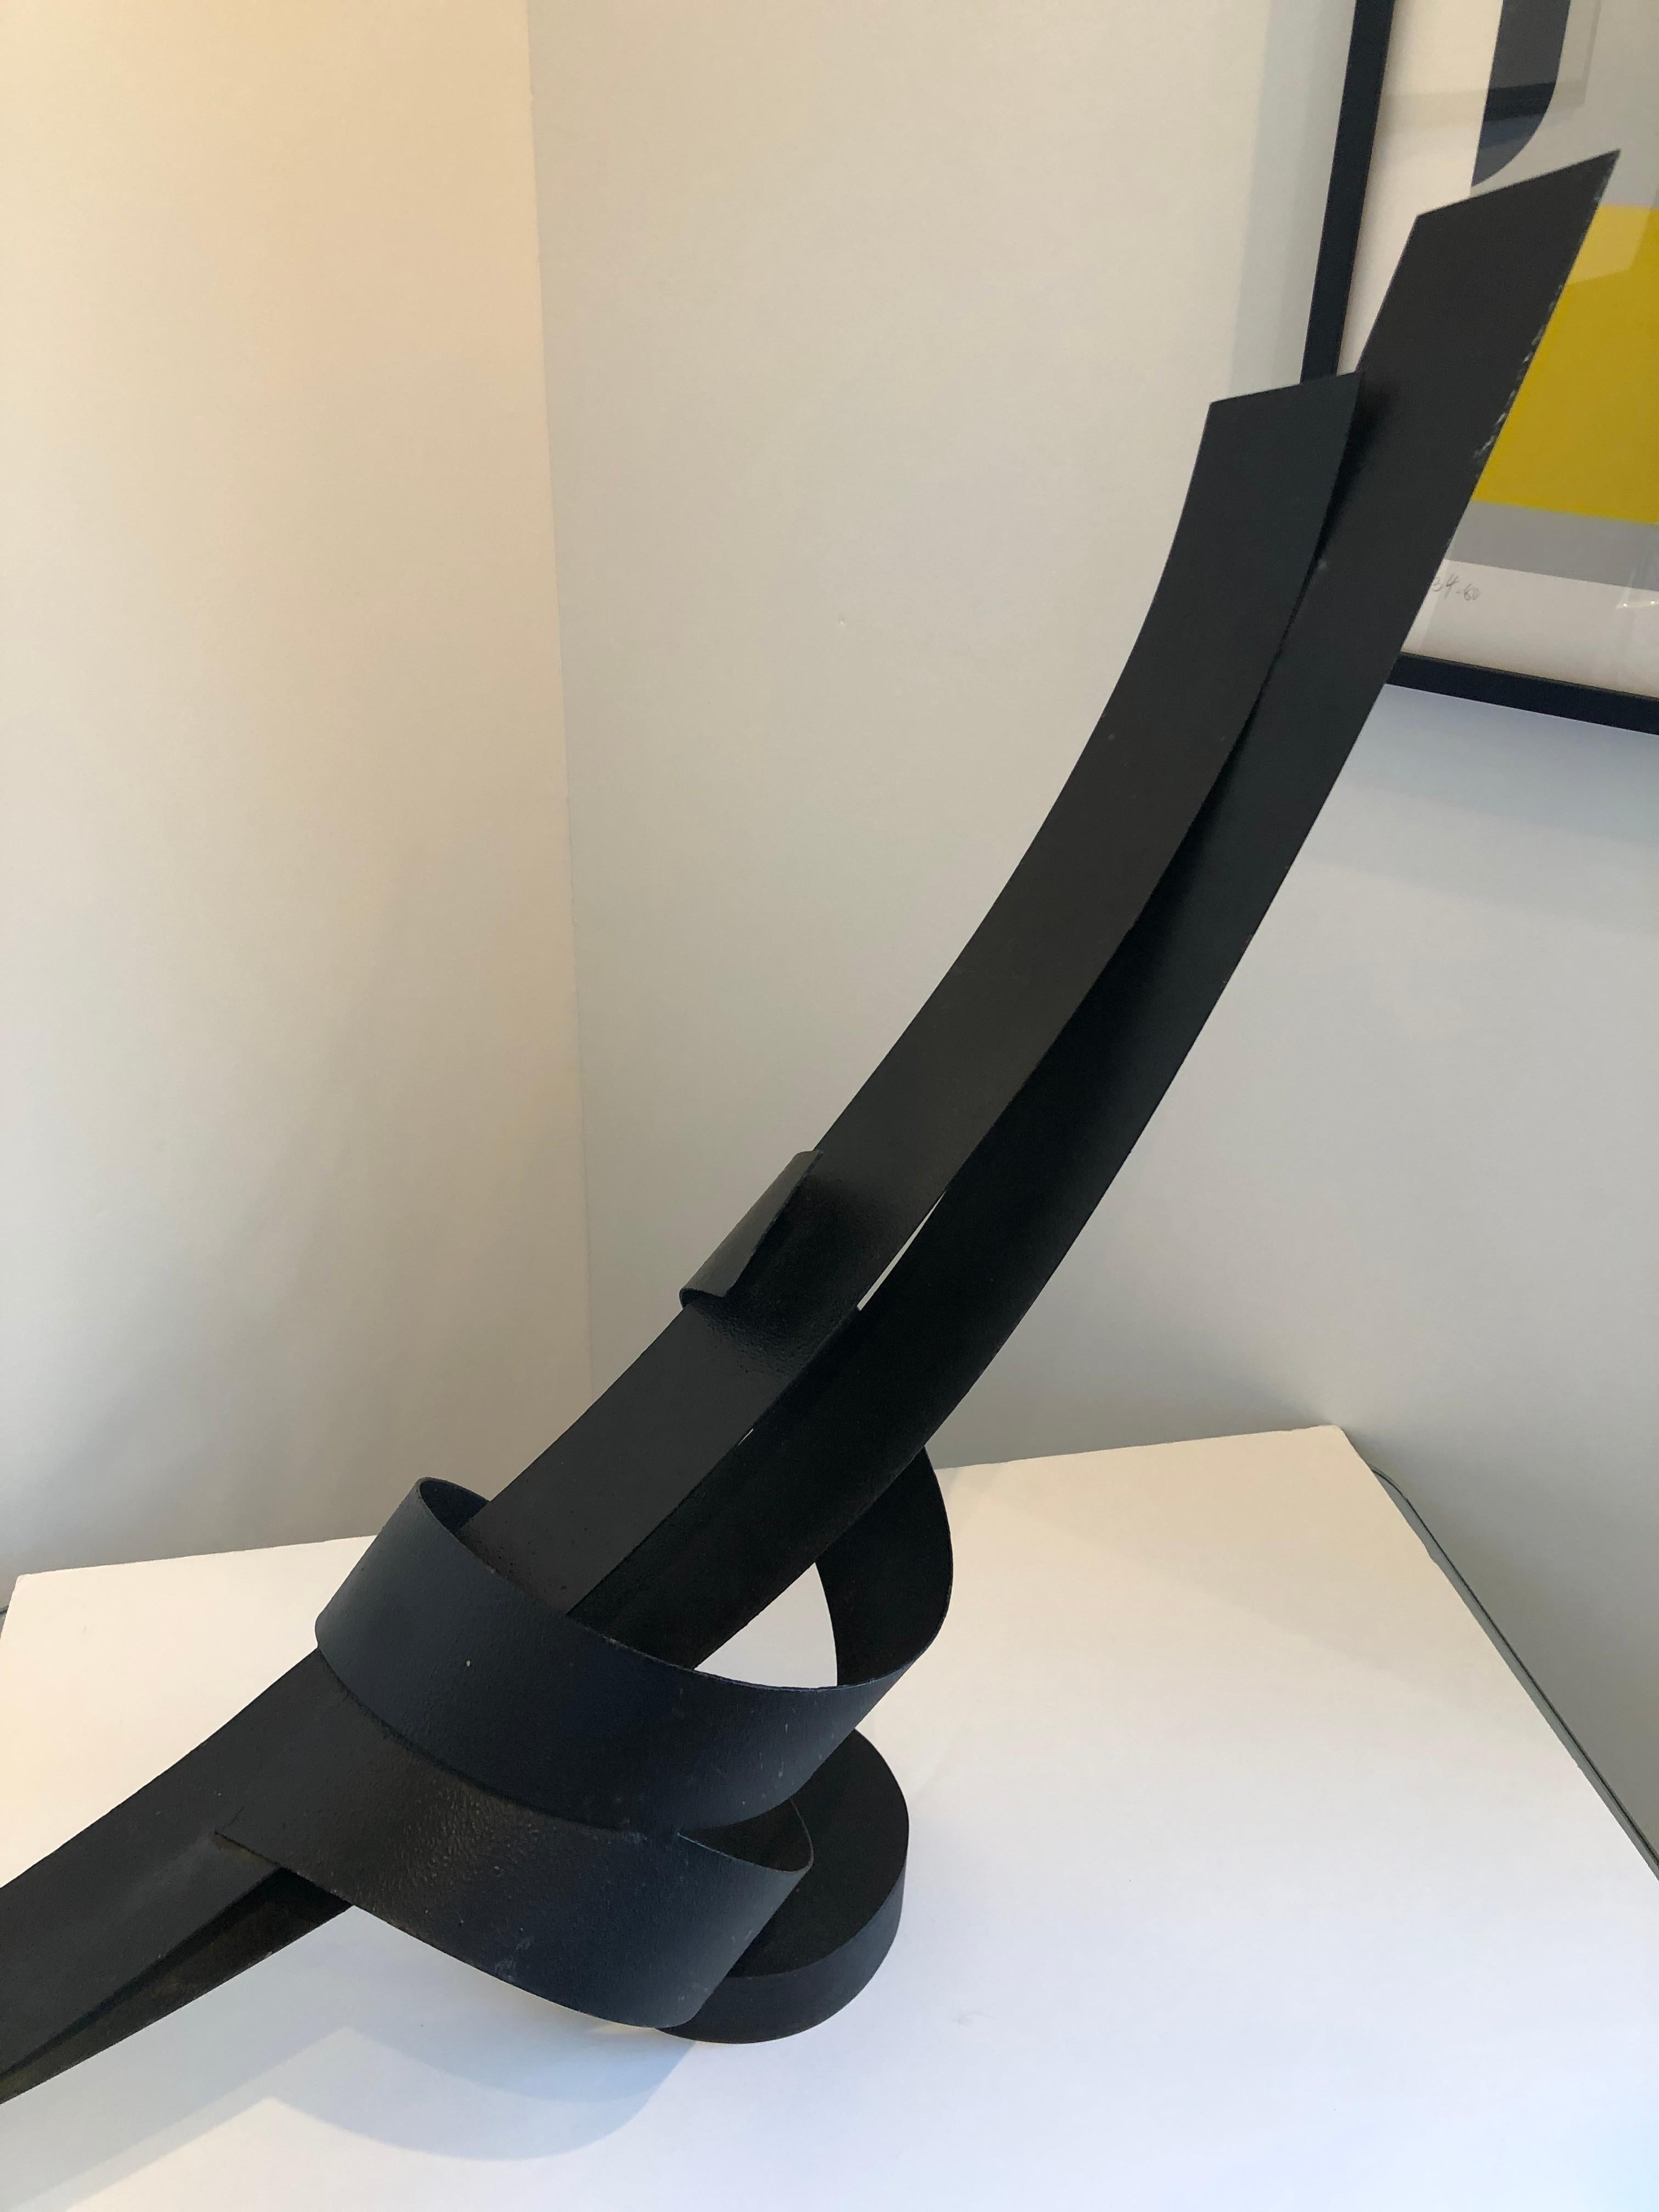 Offered is a signed 20th century abstract sculpture in black textured iron by Philadelphia artist, John Roper. Each of John Roper's sculptures is a unique design of direct metal sculpture, forged and welded by the artist in his studio. The scale of